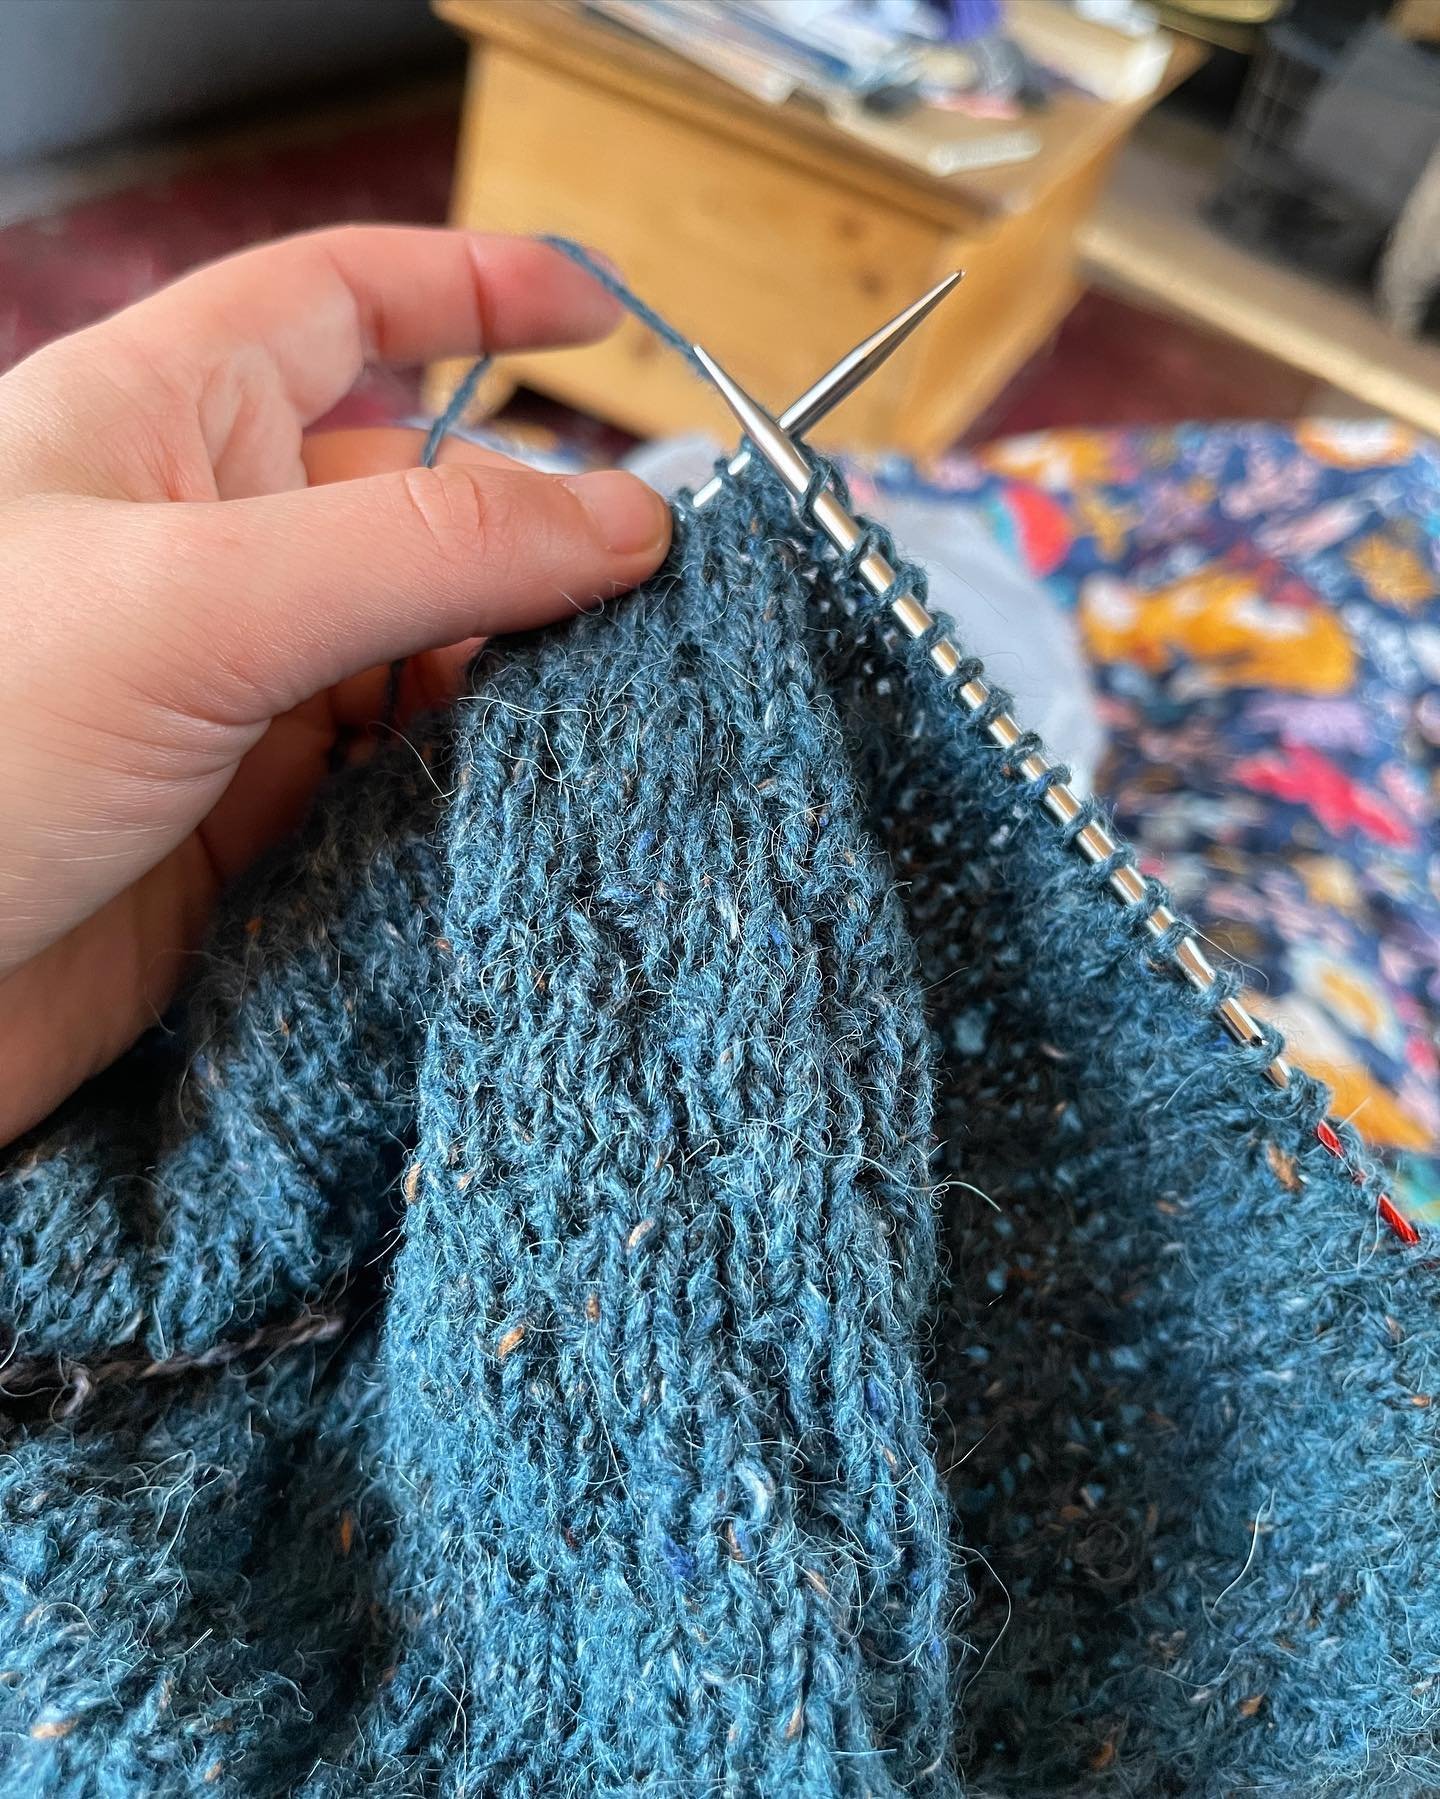 There&rsquo;s something so satisfying about working on a simple project. This sweater is working up extremely fast. The right combo of pattern + yarn has made me just want to keep going.

I have so so many other projects I should be working on instea